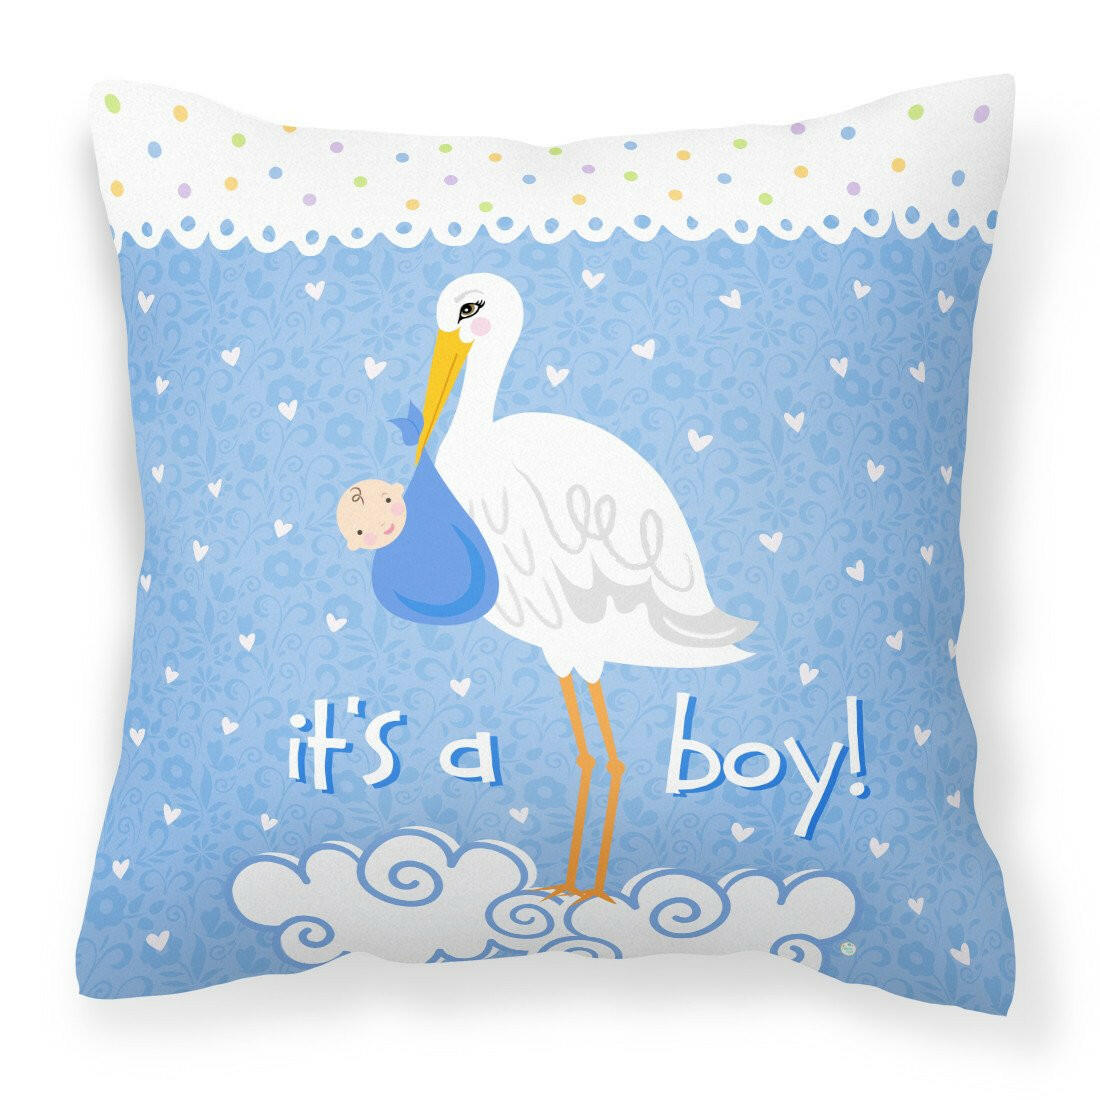 It's a Baby Boy Fabric Decorative Pillow VHA3012PW1414 by Caroline's Treasures